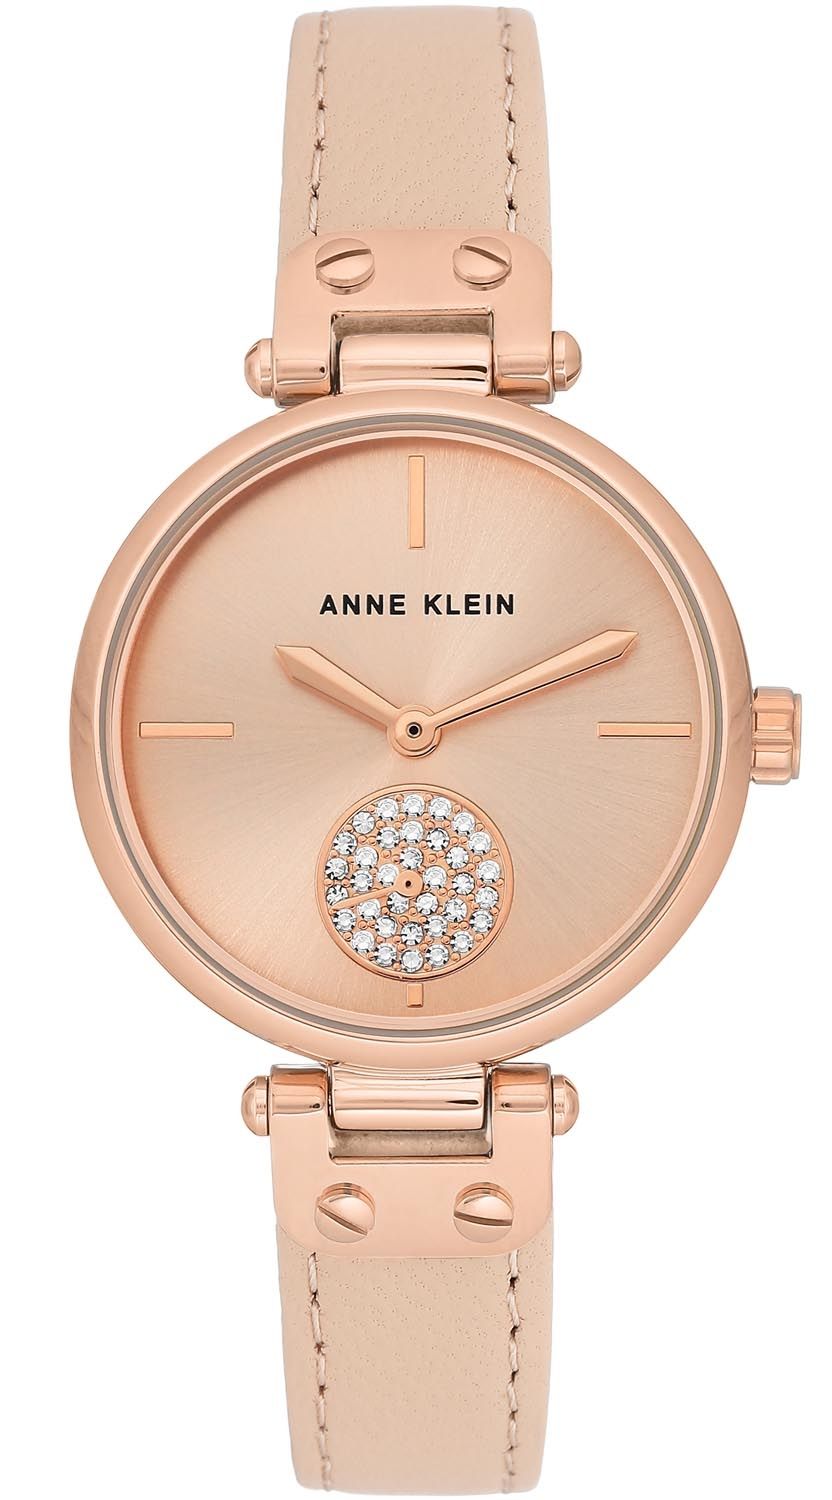 Anne Klein-watches: low prices from official reseller